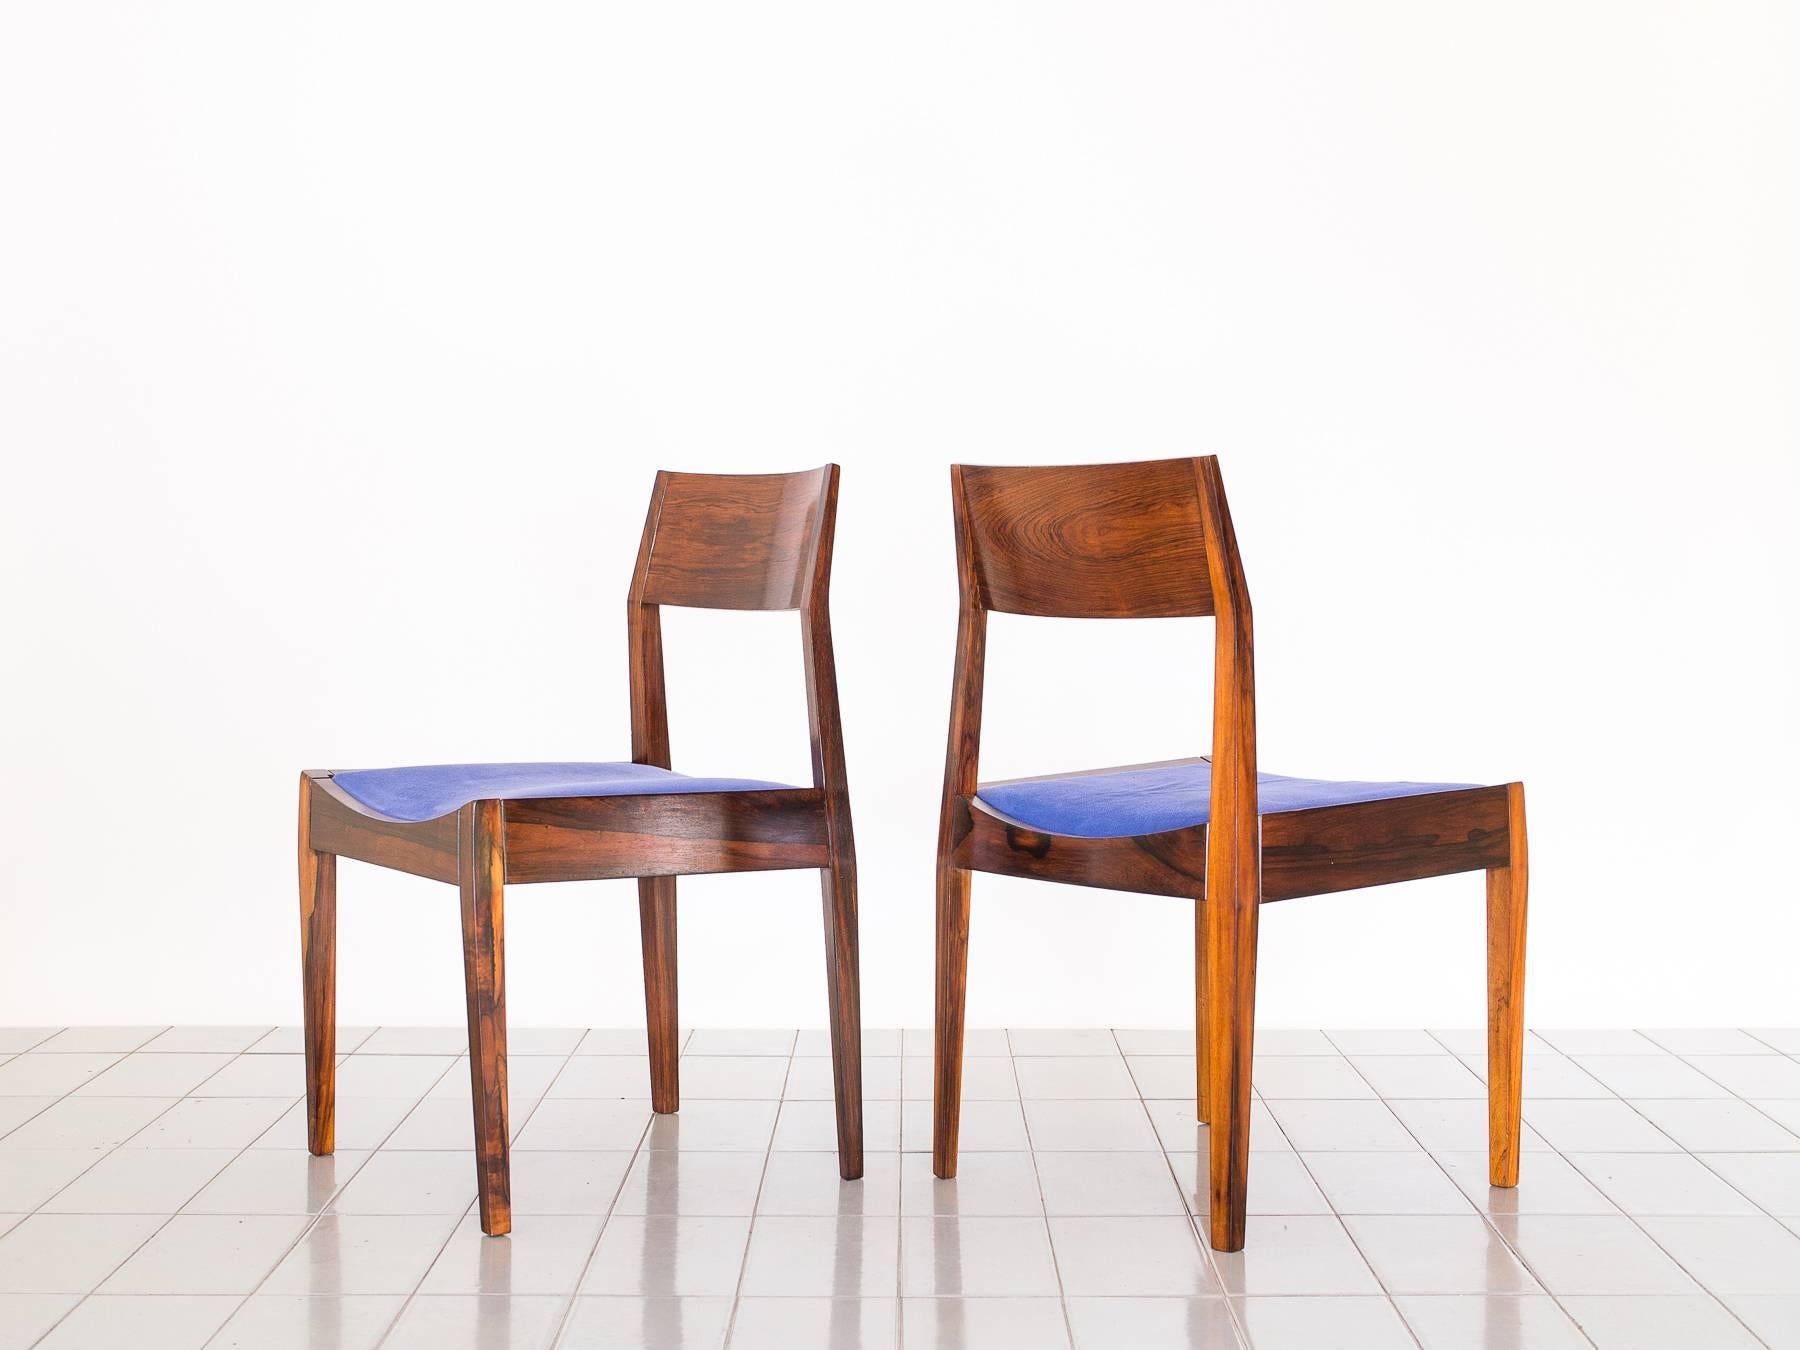 1960s Set of Ten Rosewood Dining Chairs by Italo Bianchi, Brazilian Modernism 4